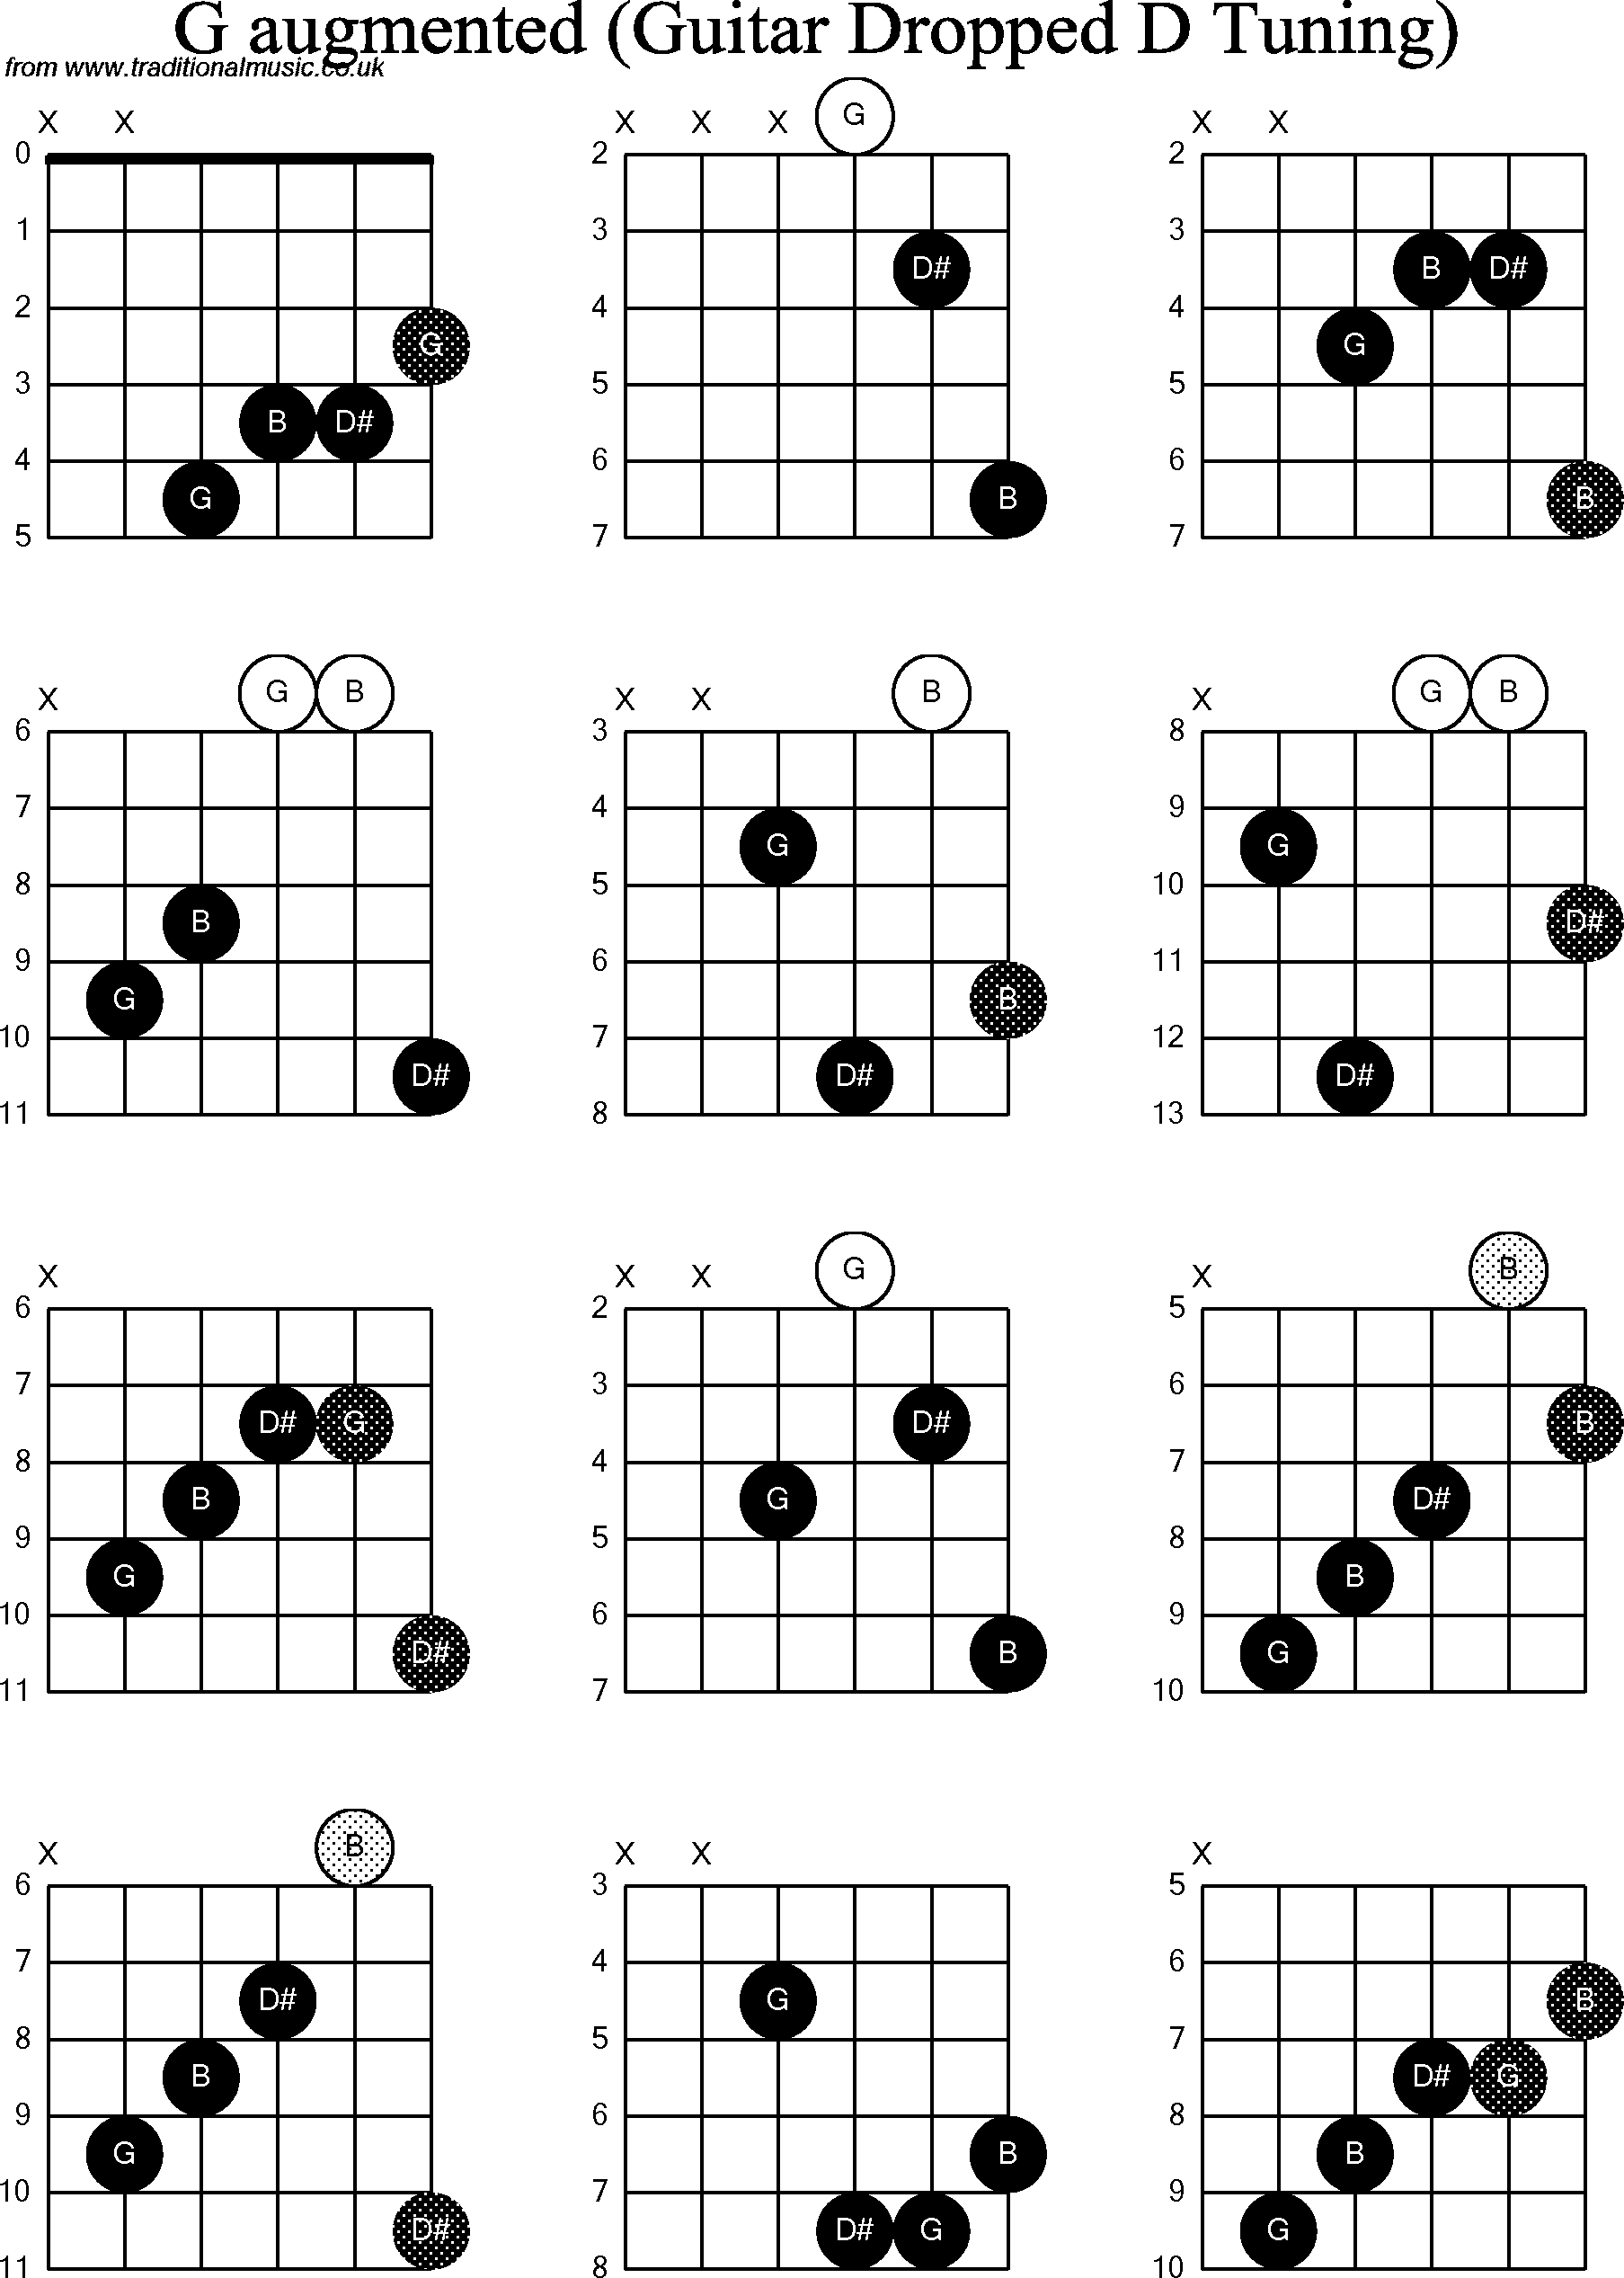 Chord diagrams for dropped D Guitar(DADGBE), G Augmented